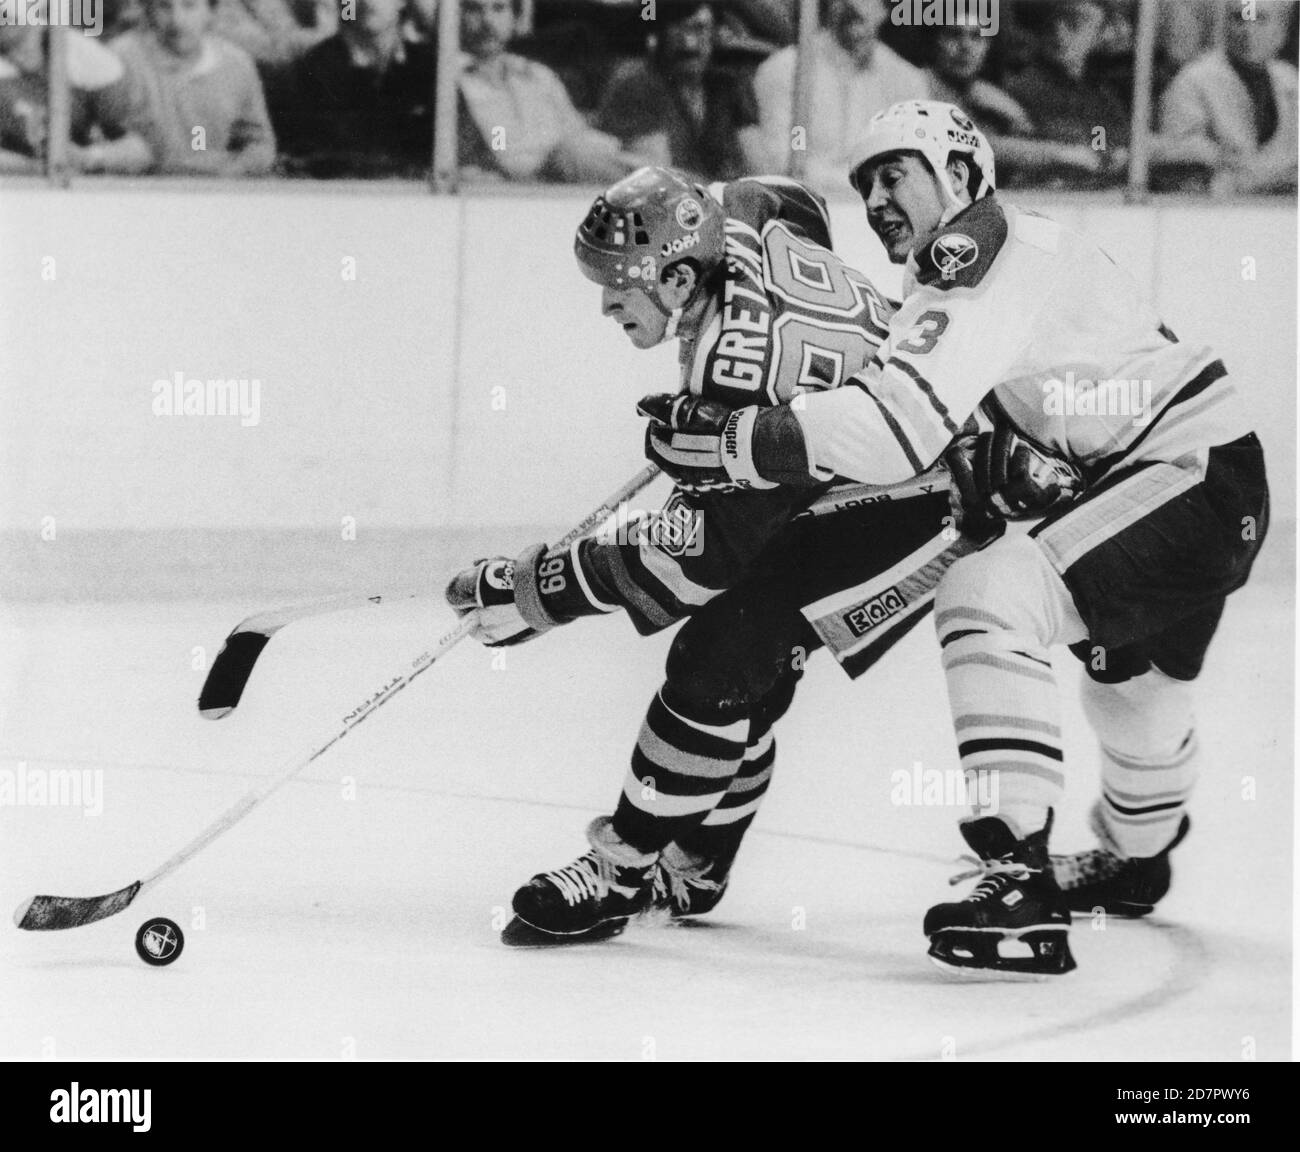 Edmonton Oilers Wayne Gretzky, left, is held on by Buffalo Sabres Hannu Virta during a NHL hockey game in Buffalo, New York on January 13, 1985. Photo by Francis Specker Stock Photo